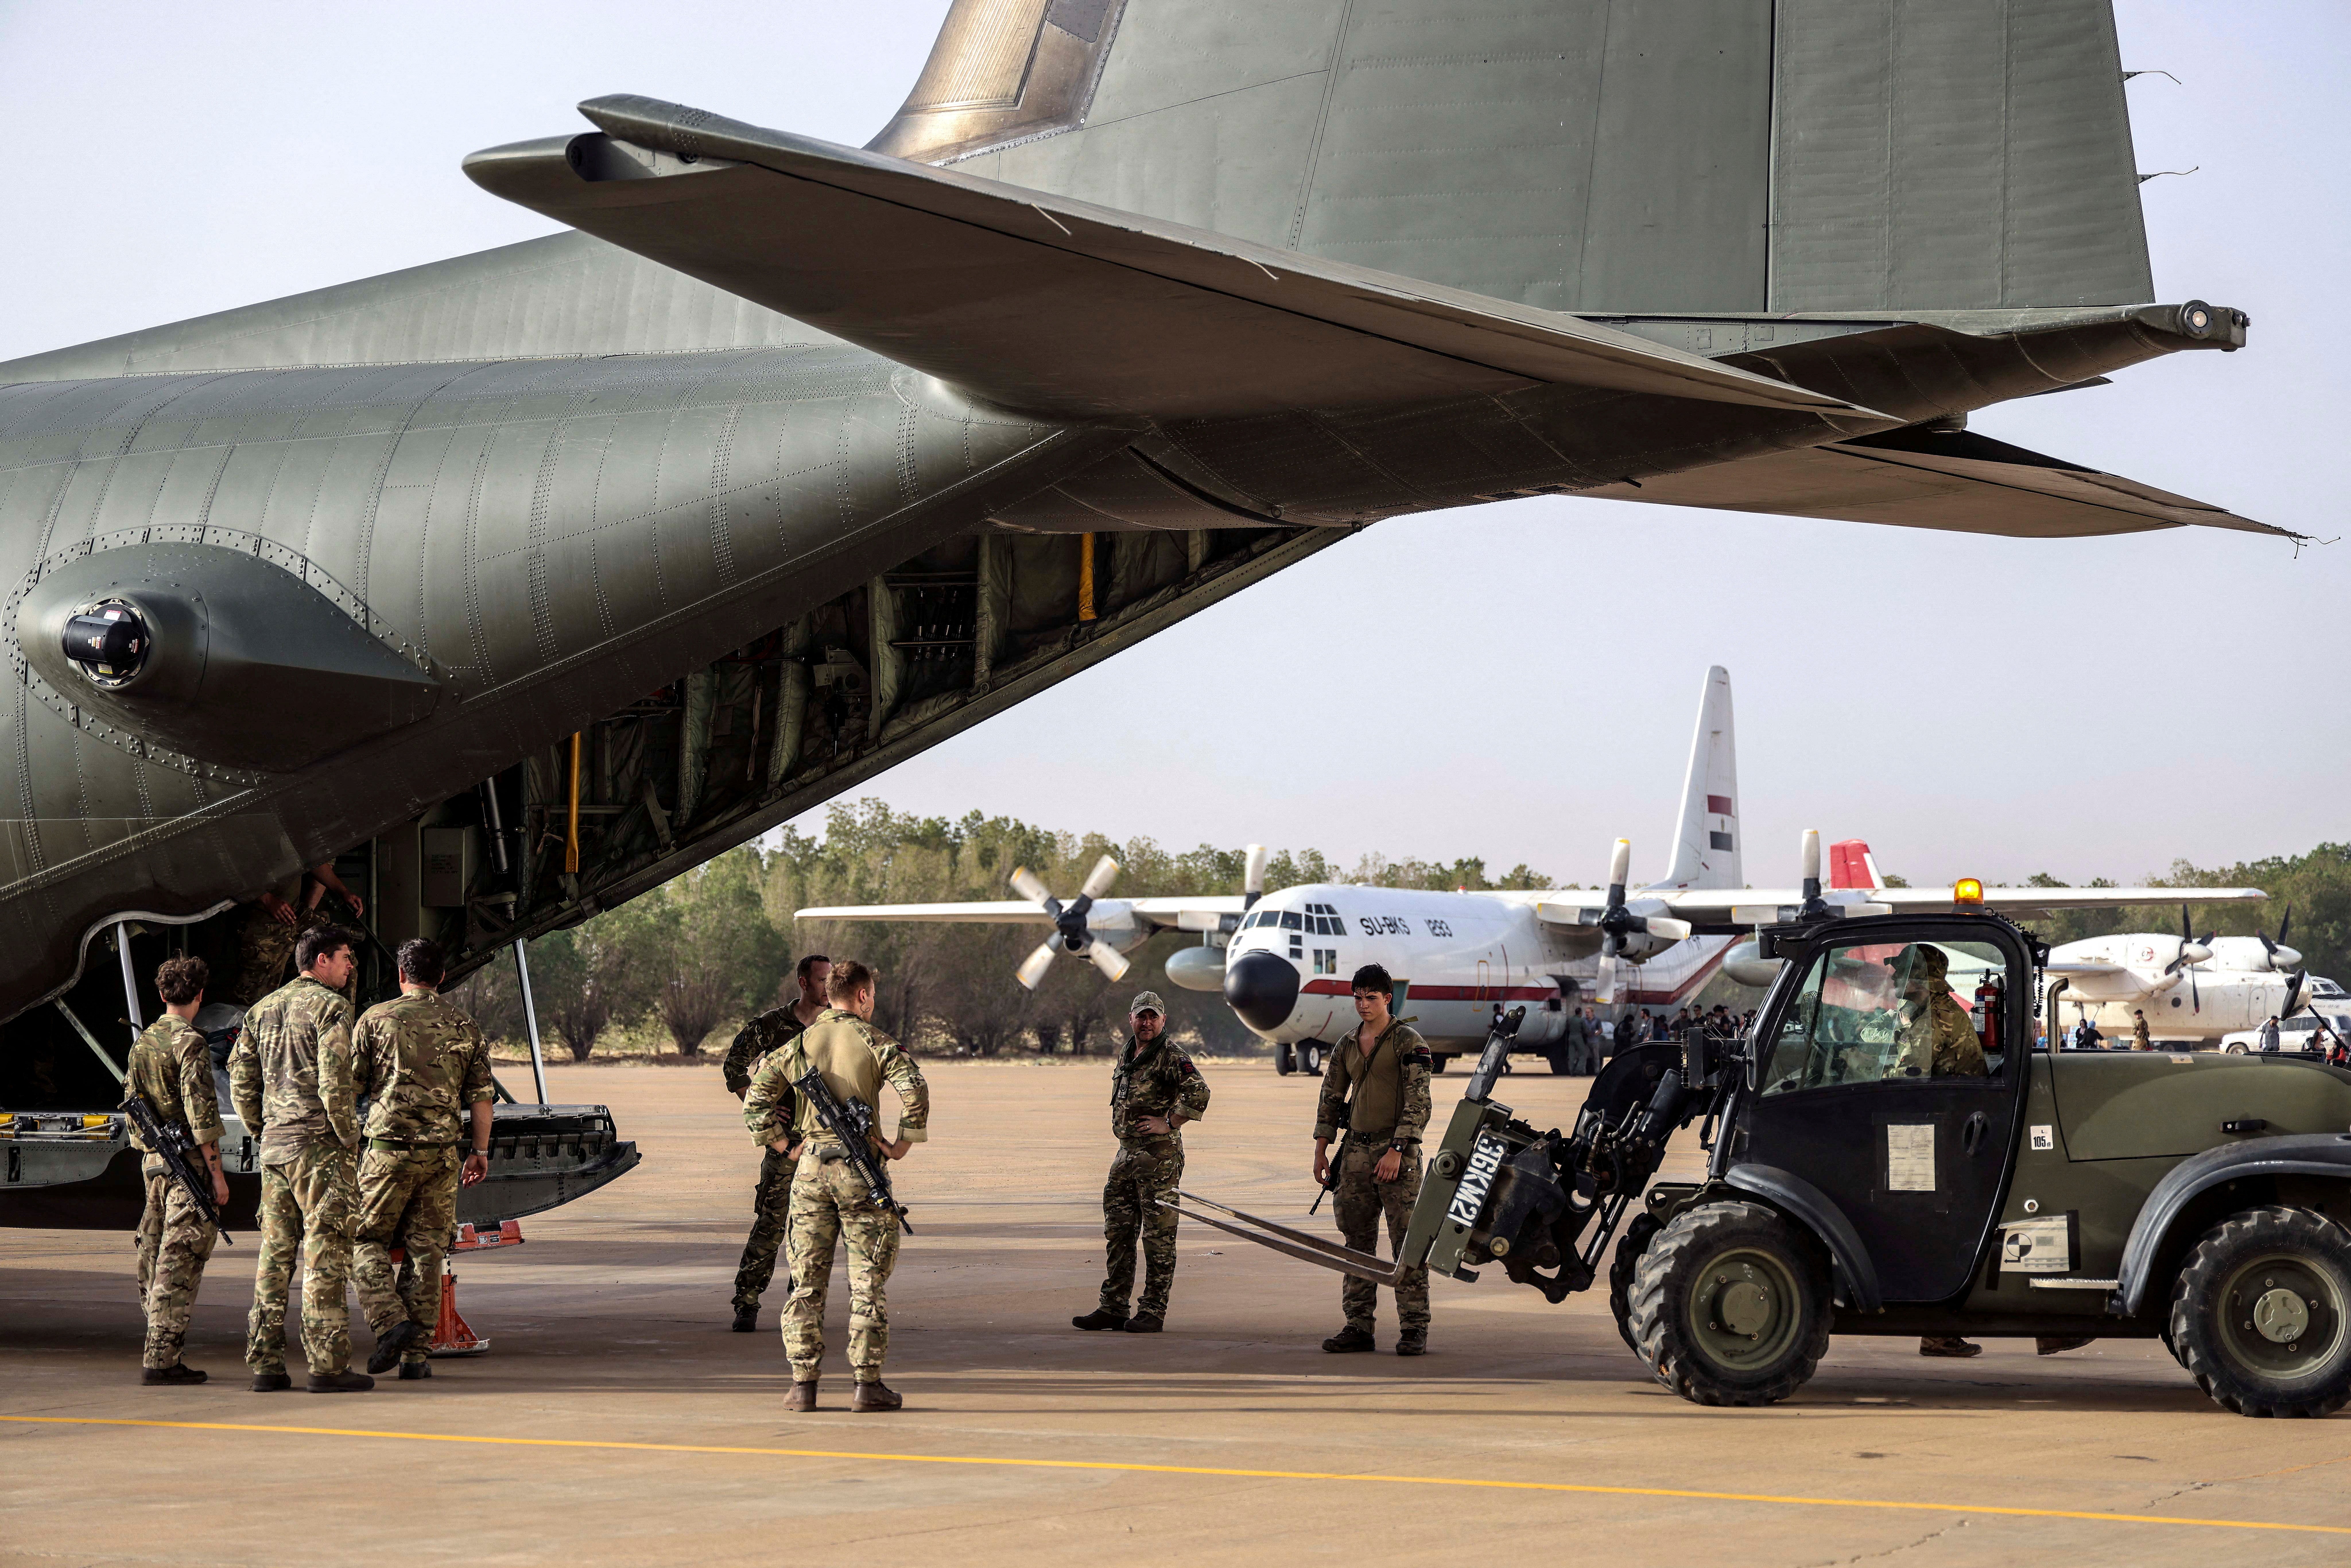 Military personnel unload stores during the evacuation of British citizens, at Wadi Seidna airport